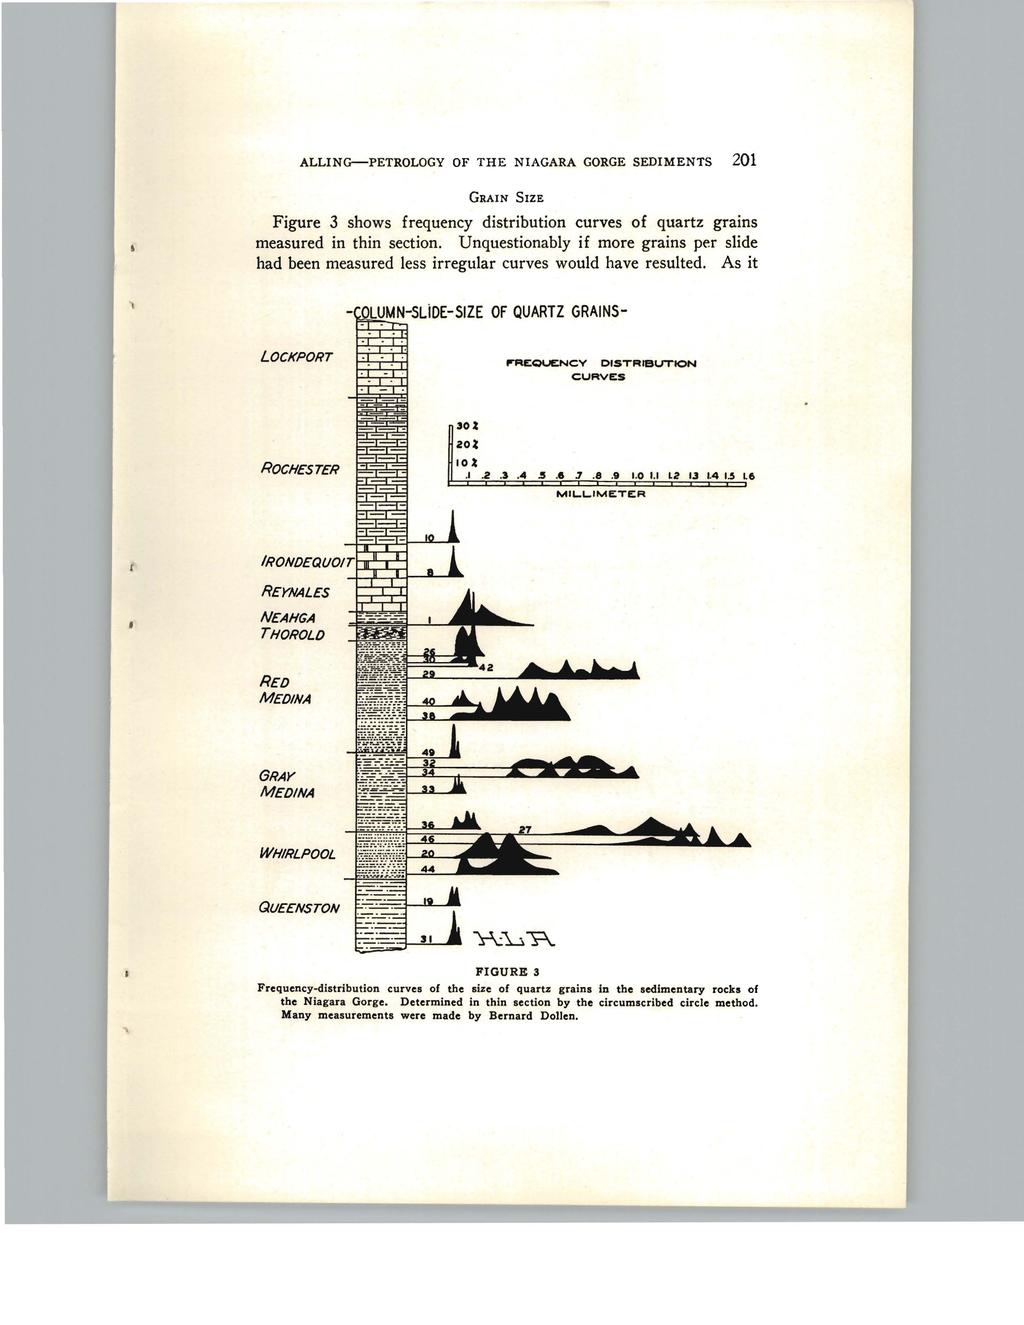 ALLING-PETROLOGY OF THE NIAGARA GORGE SEDIMENTS 201 GRAIN SIZE Figure 3 shows frequency distribution curves of quartz grains measured in thin section.